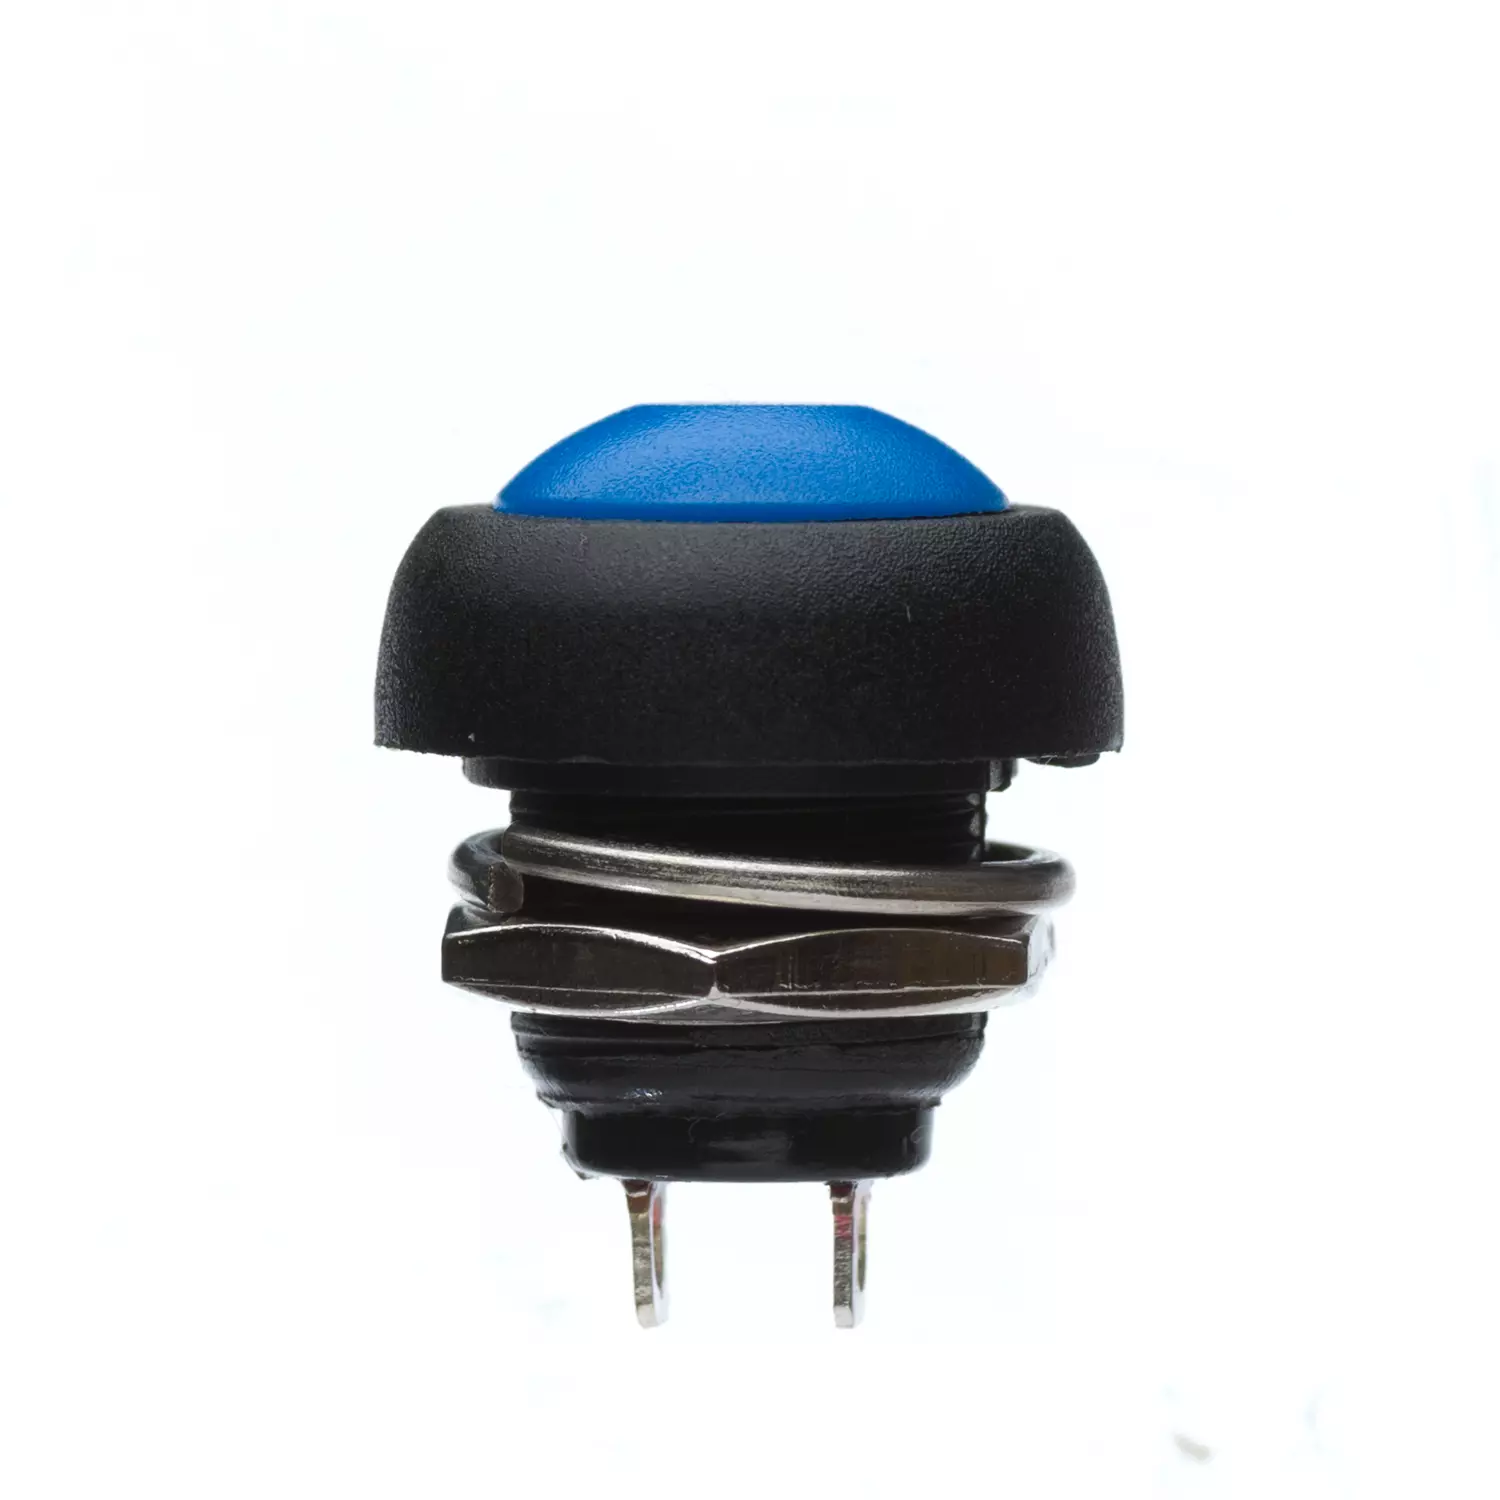 Photo of 12mm Momentary Push Button Dome - Blue